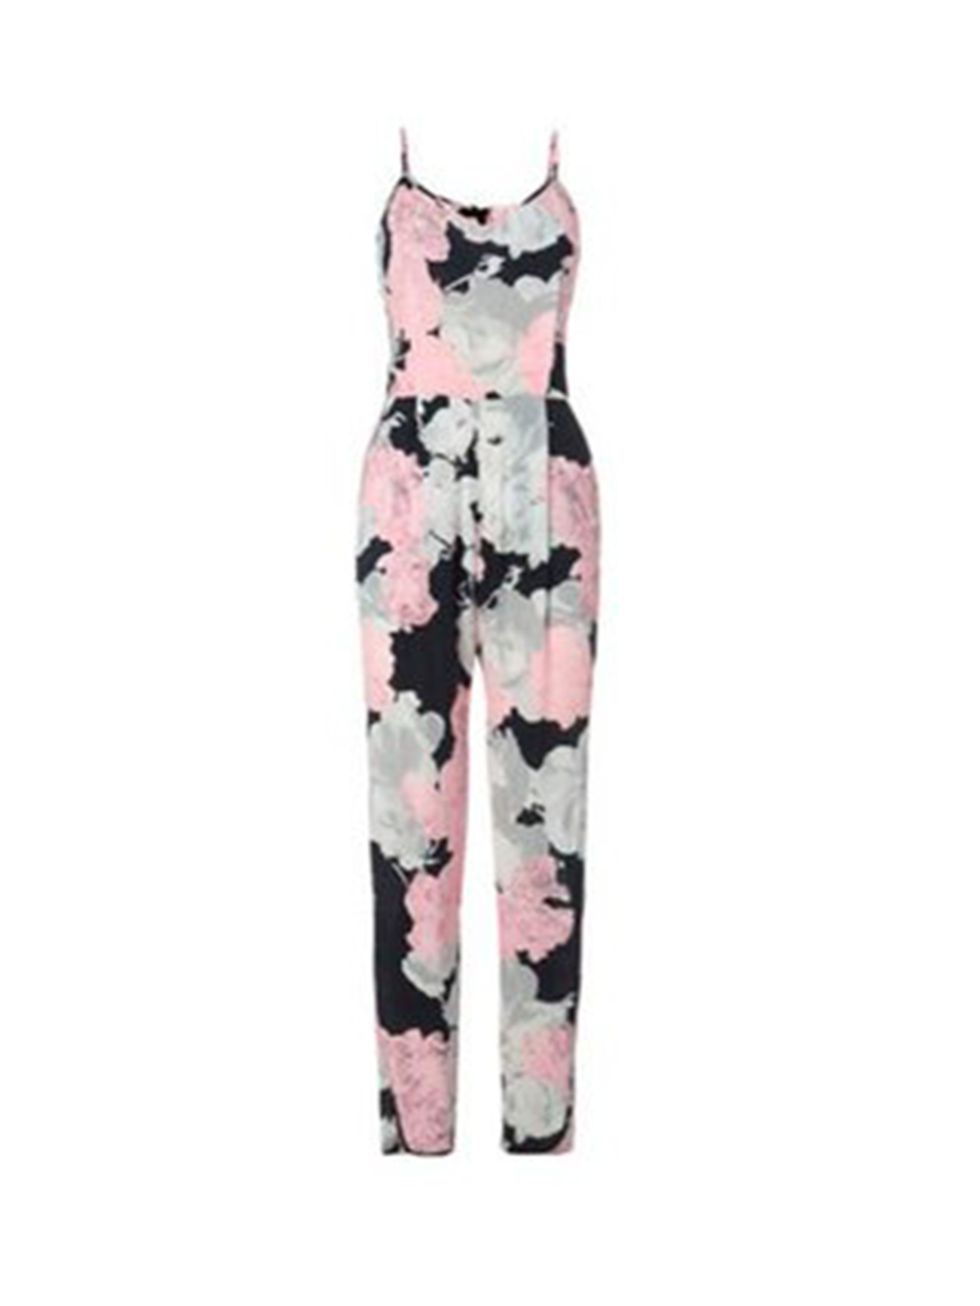 Wear with Birkenstocks by day, and killer heels by night.

Whistles jumpsuit, £135